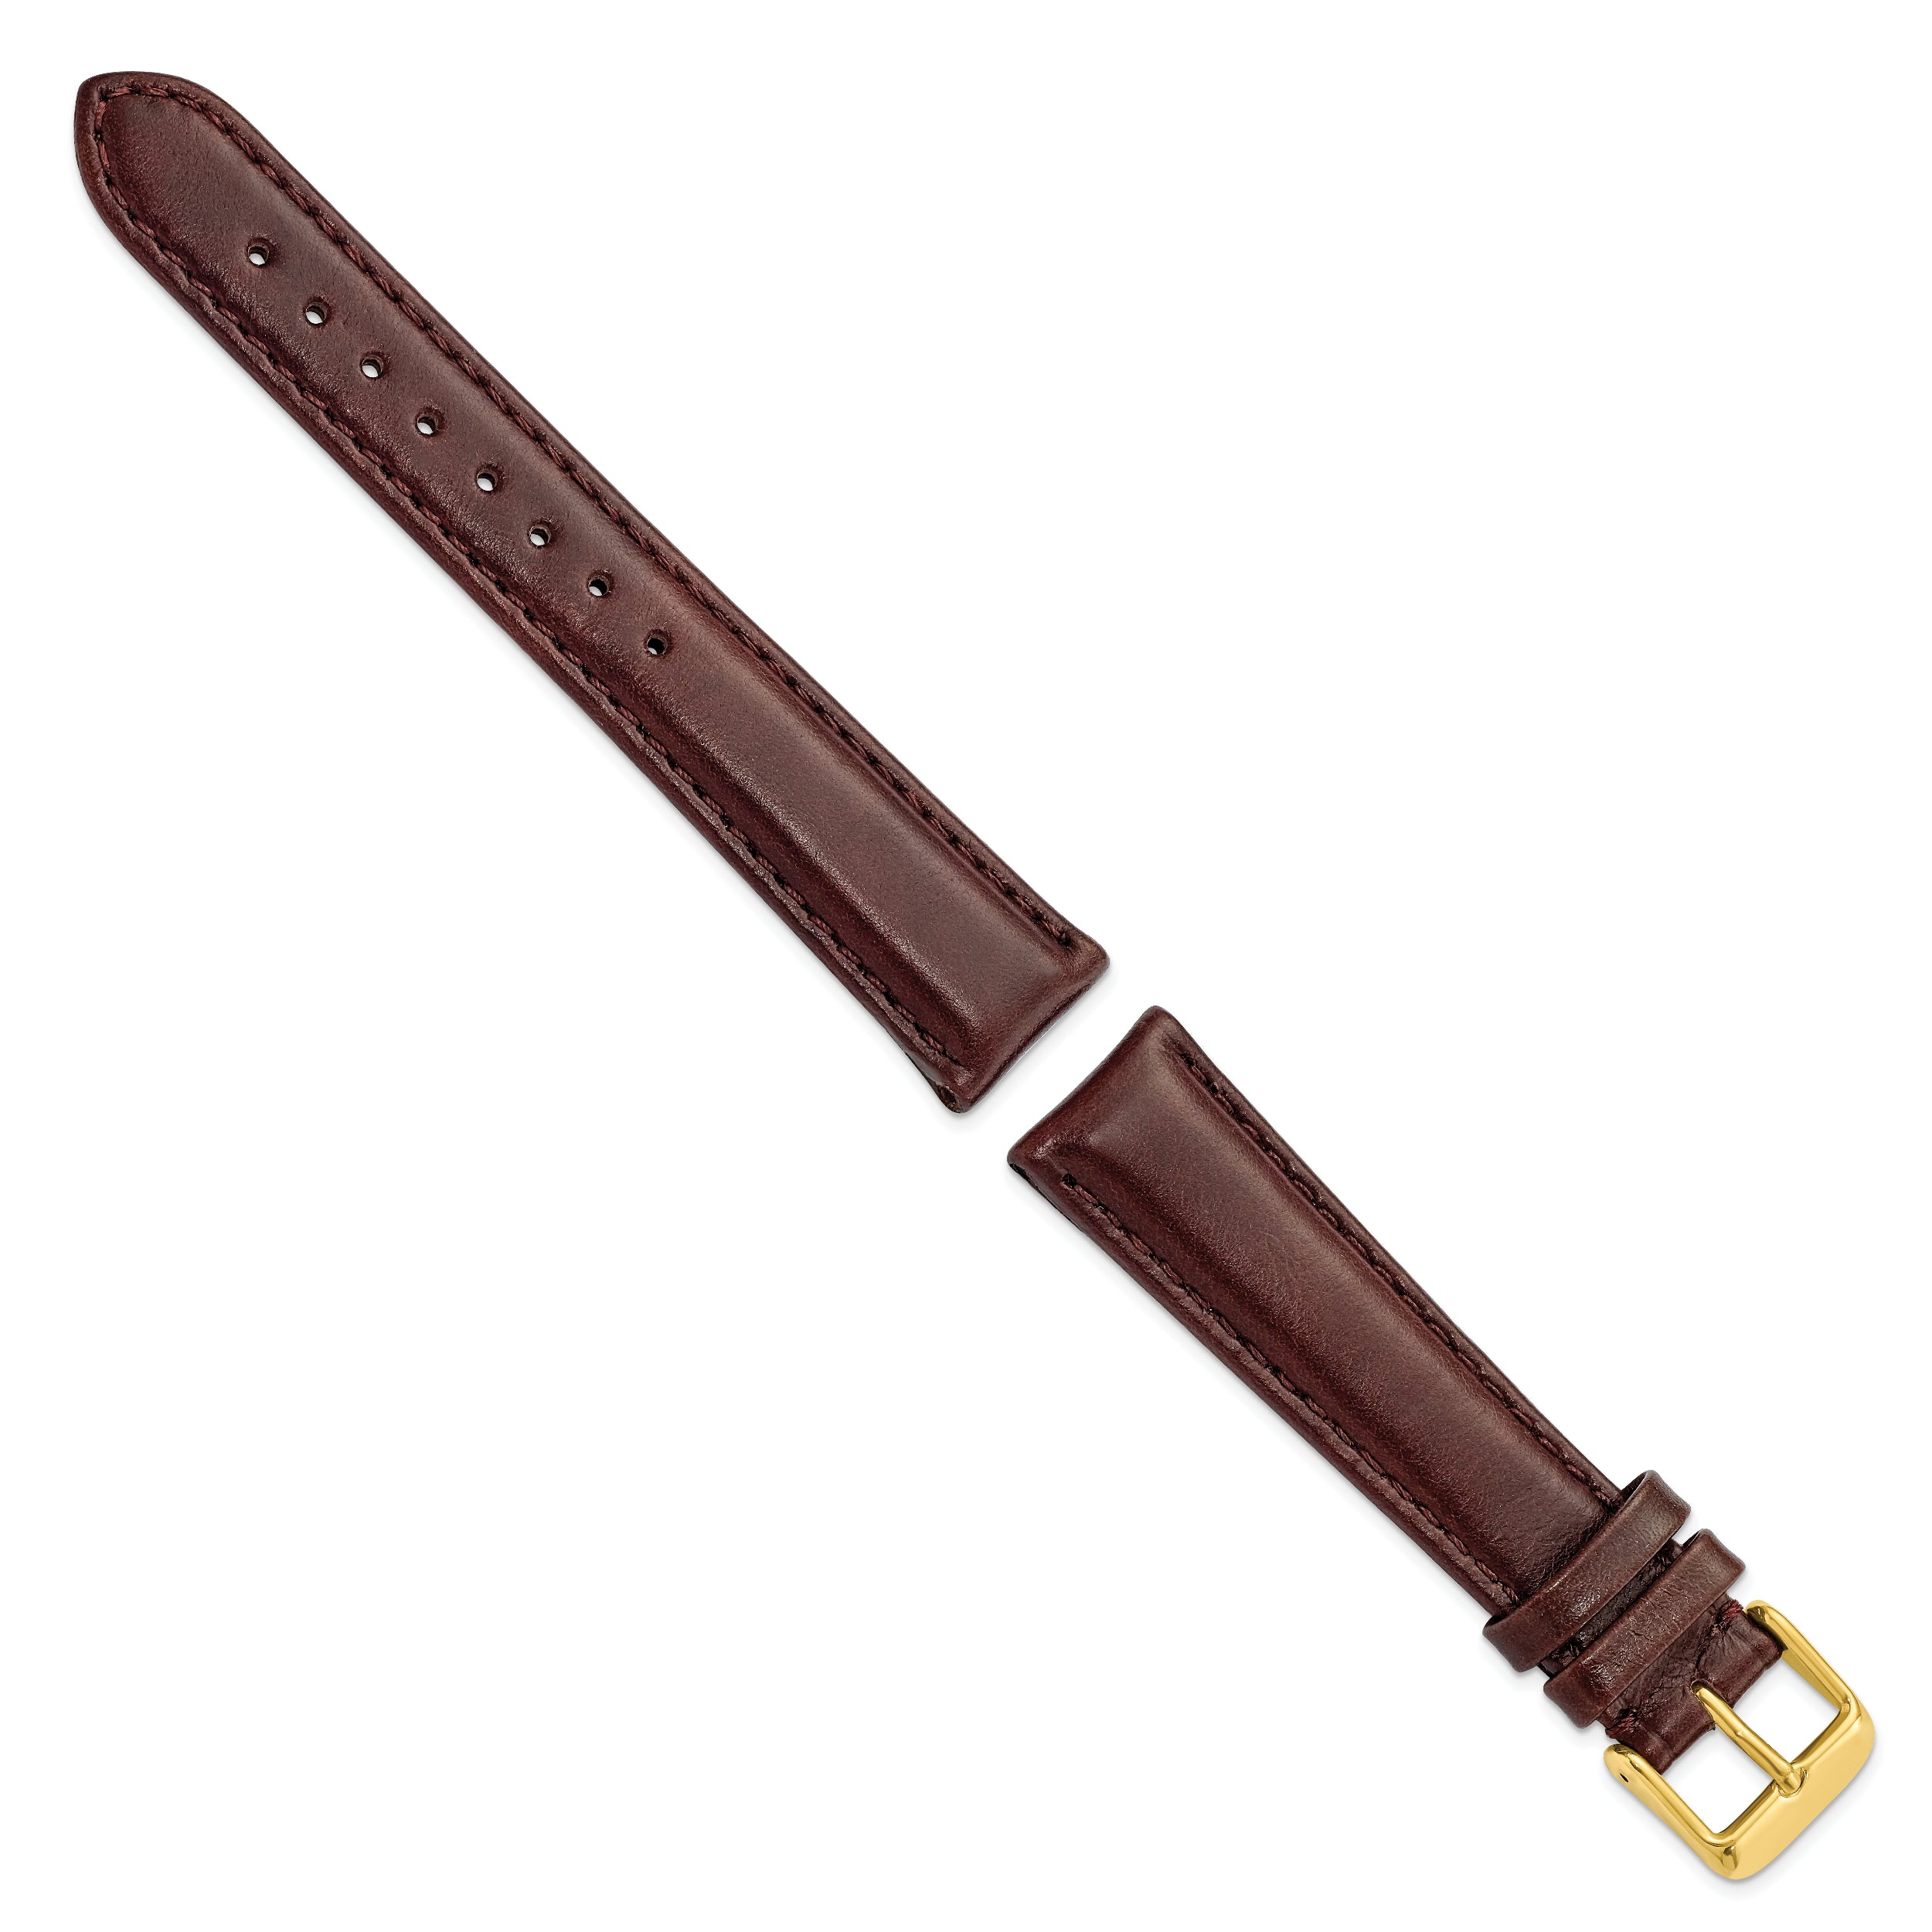 16mm Dark Brown Smooth Leather Chronograph with Gold-tone Buckle 7.5 inch Watch Band